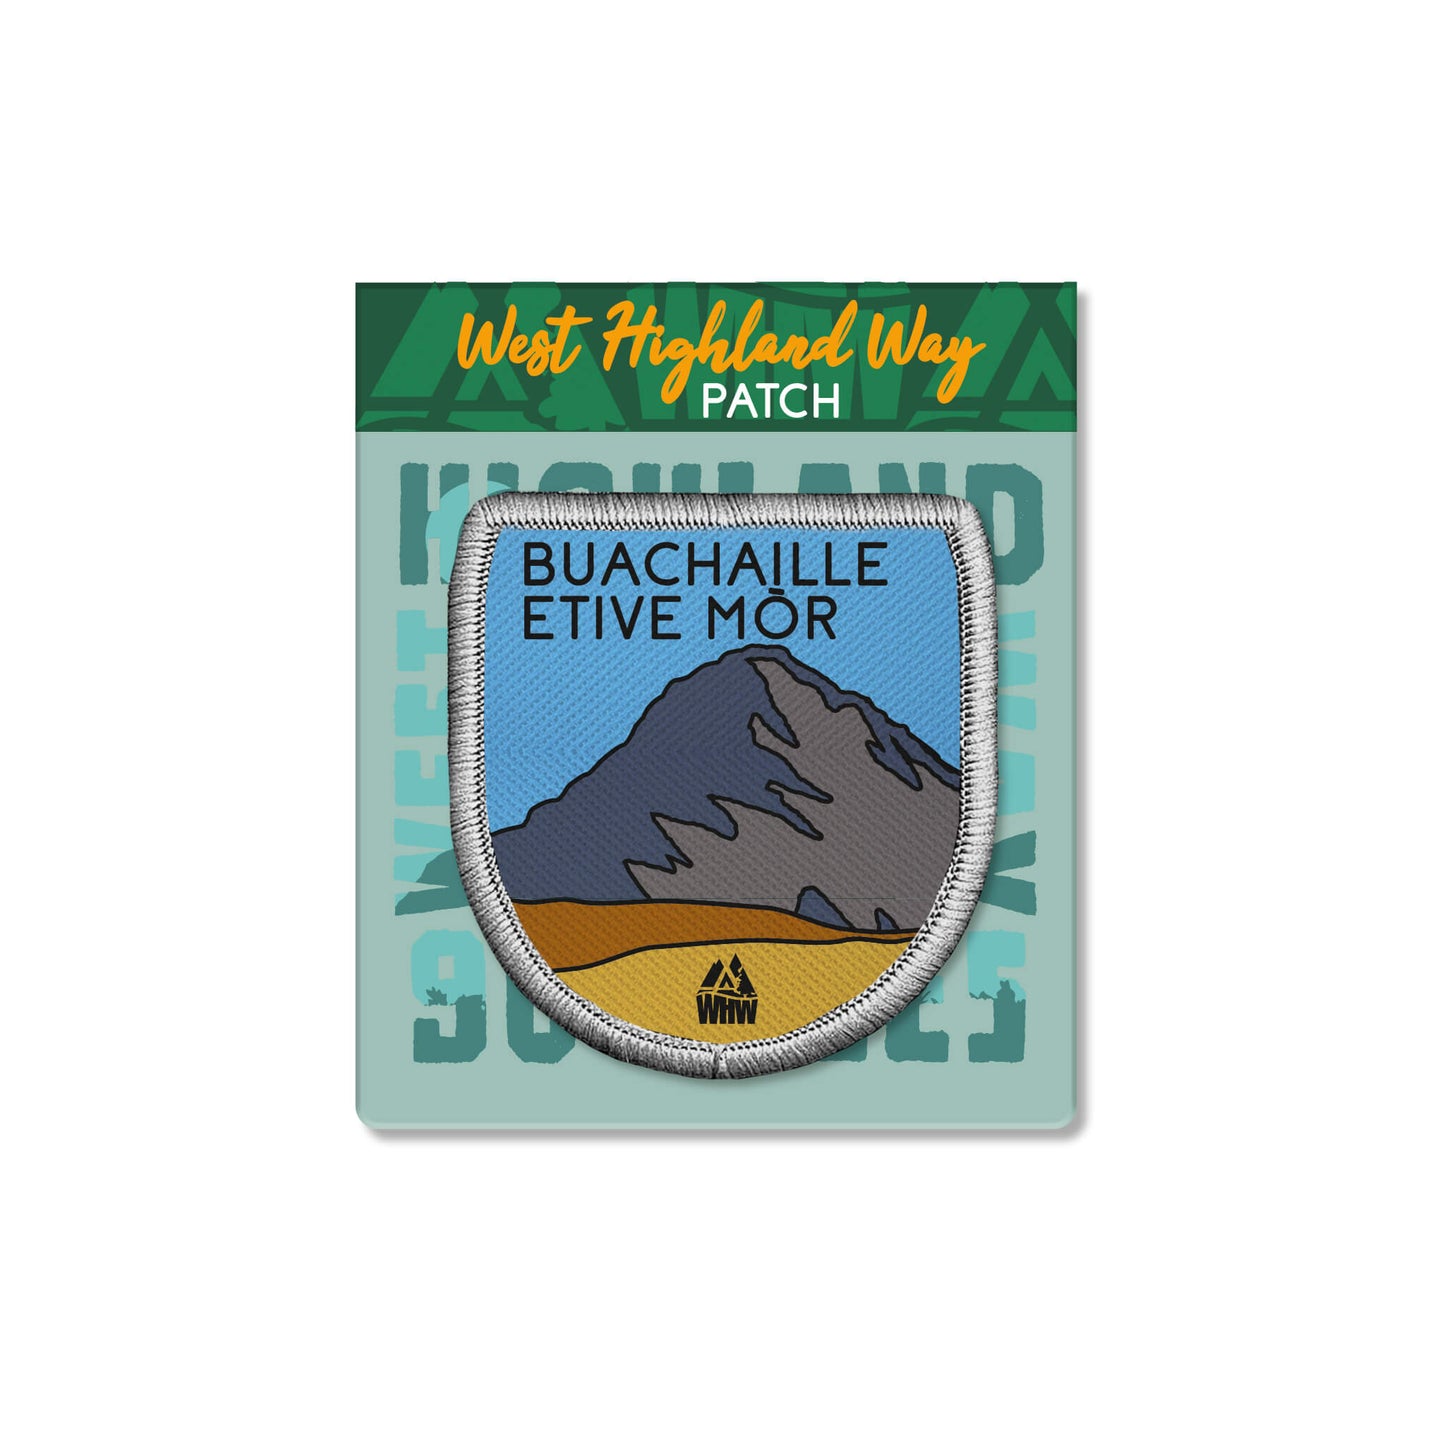 Buachaille Etive Mor Woven Patch - West Highland Way